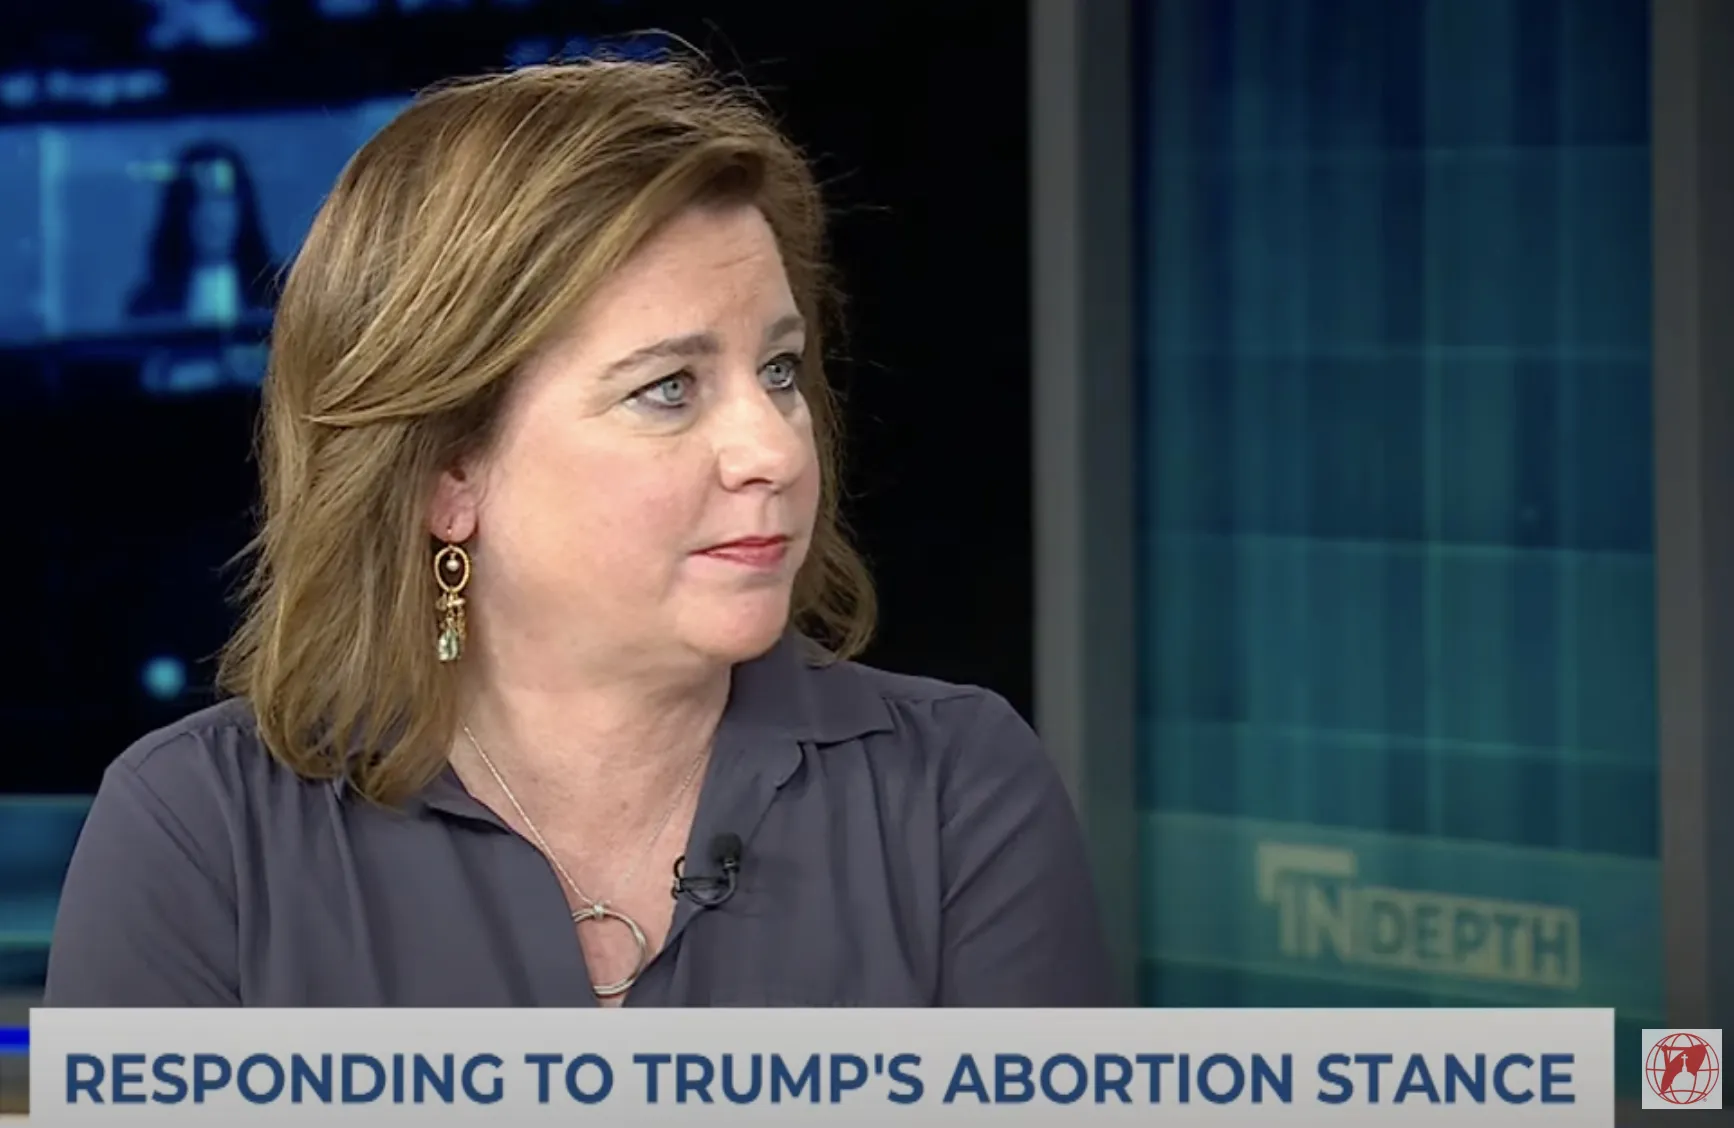 Susan B. Anthony Pro-Life America President Marjorie Dannenfelser told EWTN News the pro-life movement is grounded in the dignity of the individual "and has never stopped at a state line."?w=200&h=150